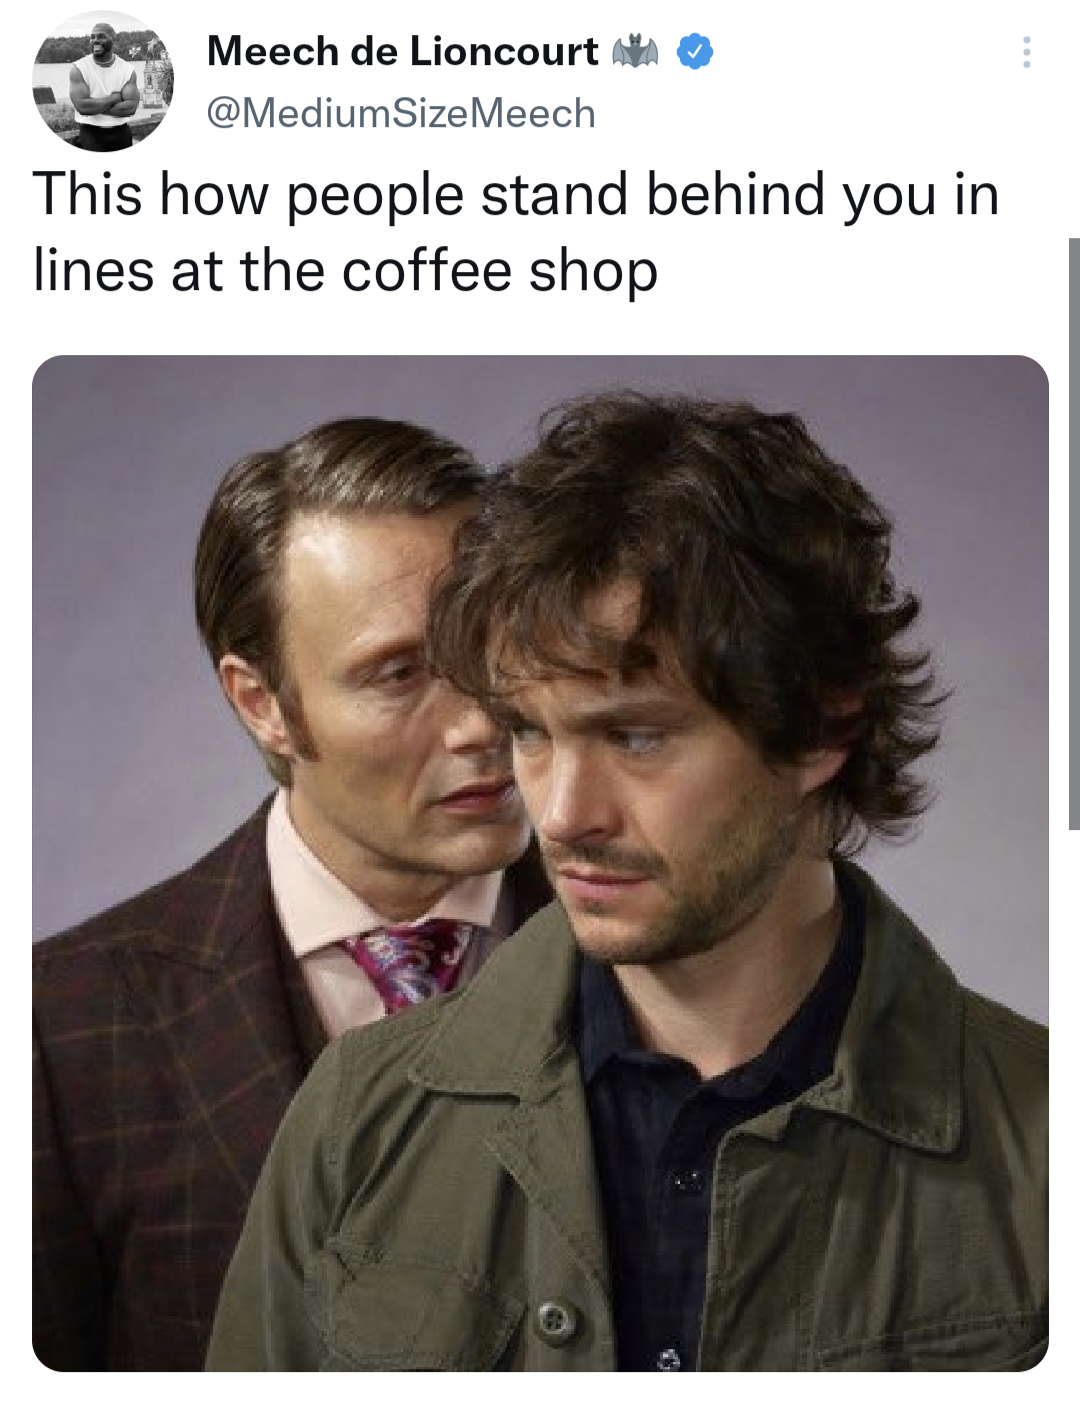 funny tweets - hannibal promo - Meech de Lioncourt This how people stand behind you in lines at the coffee shop